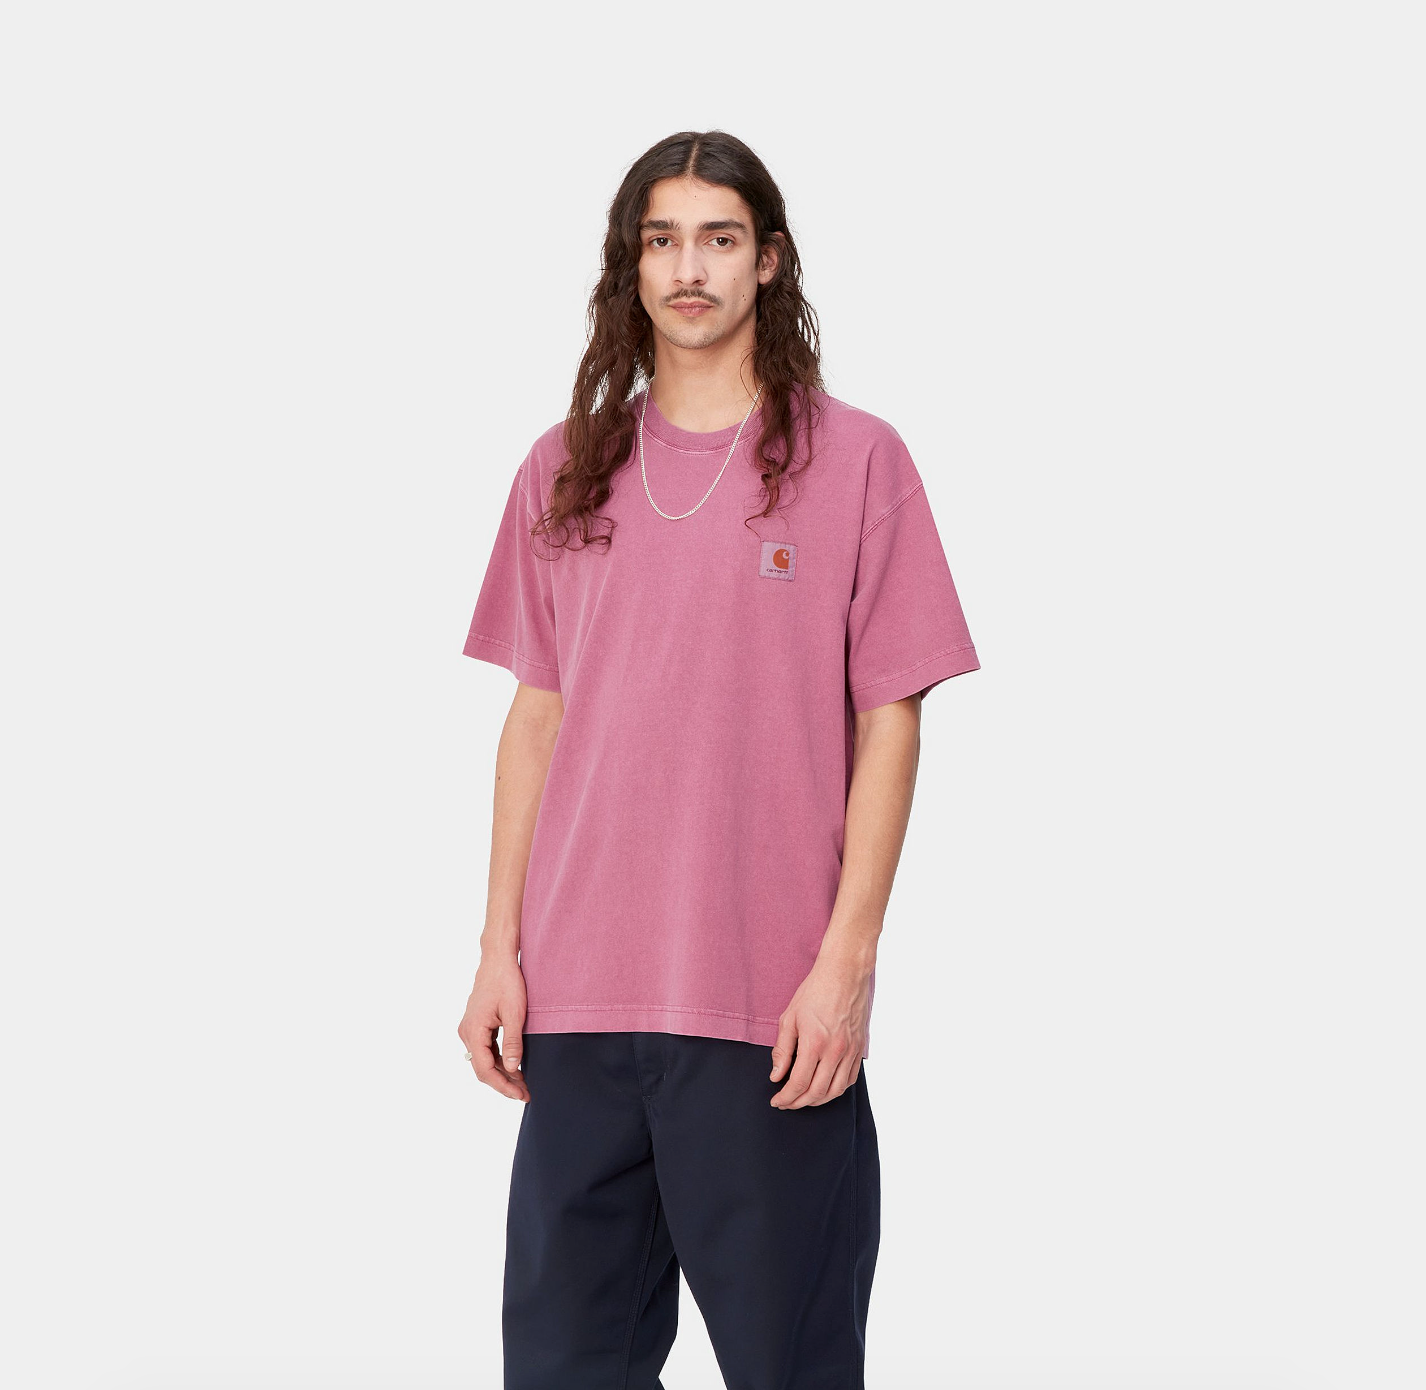 NELSON WASHED TSHIRT MAGENTA RED